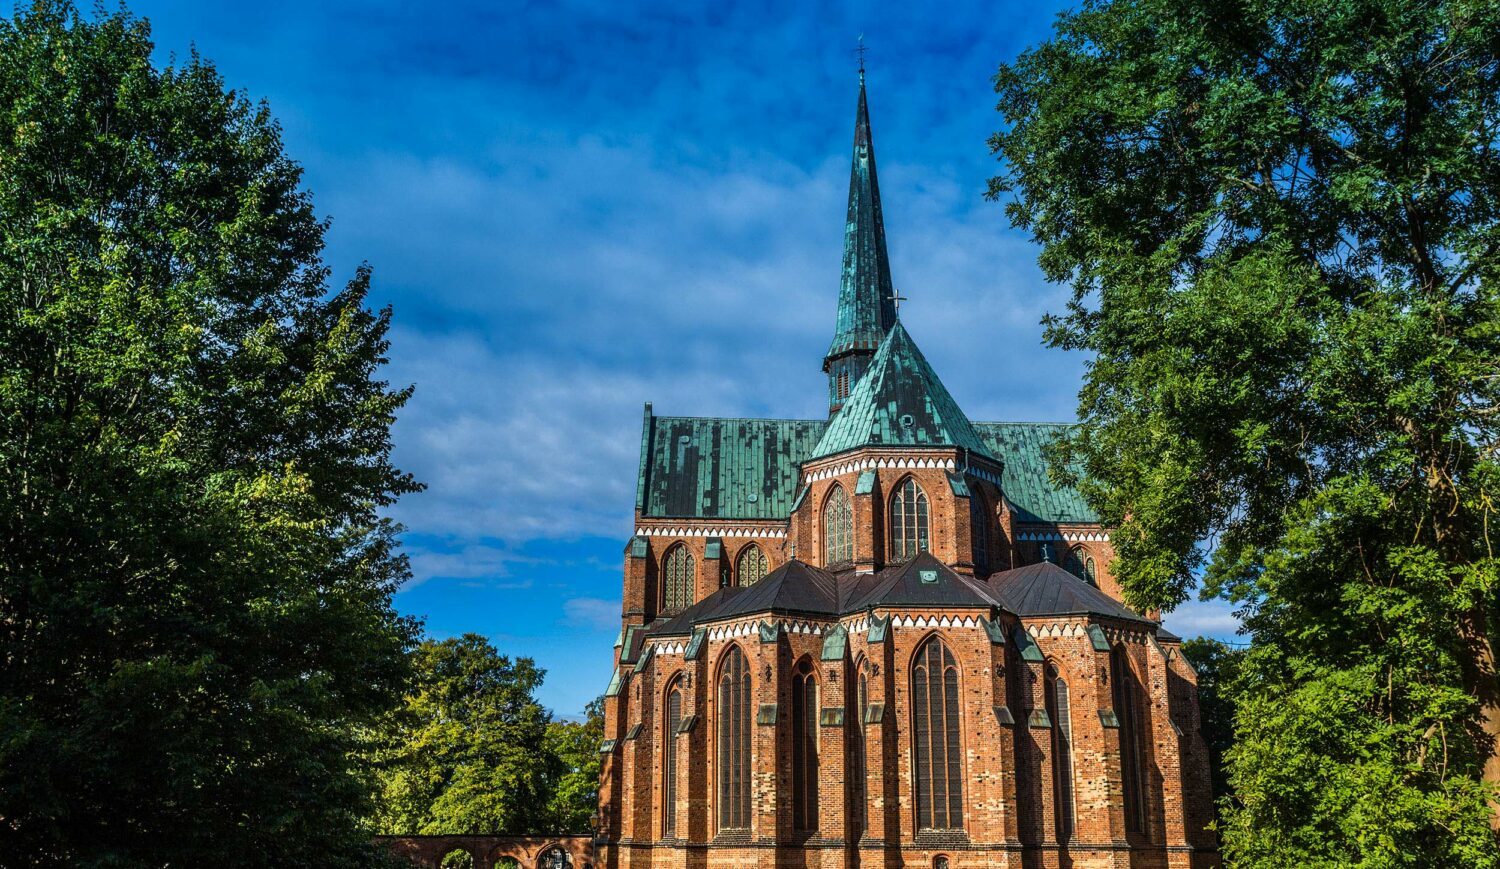 The Doberan Minster is one of the most important in the Baltic Sea region and is also known as the 